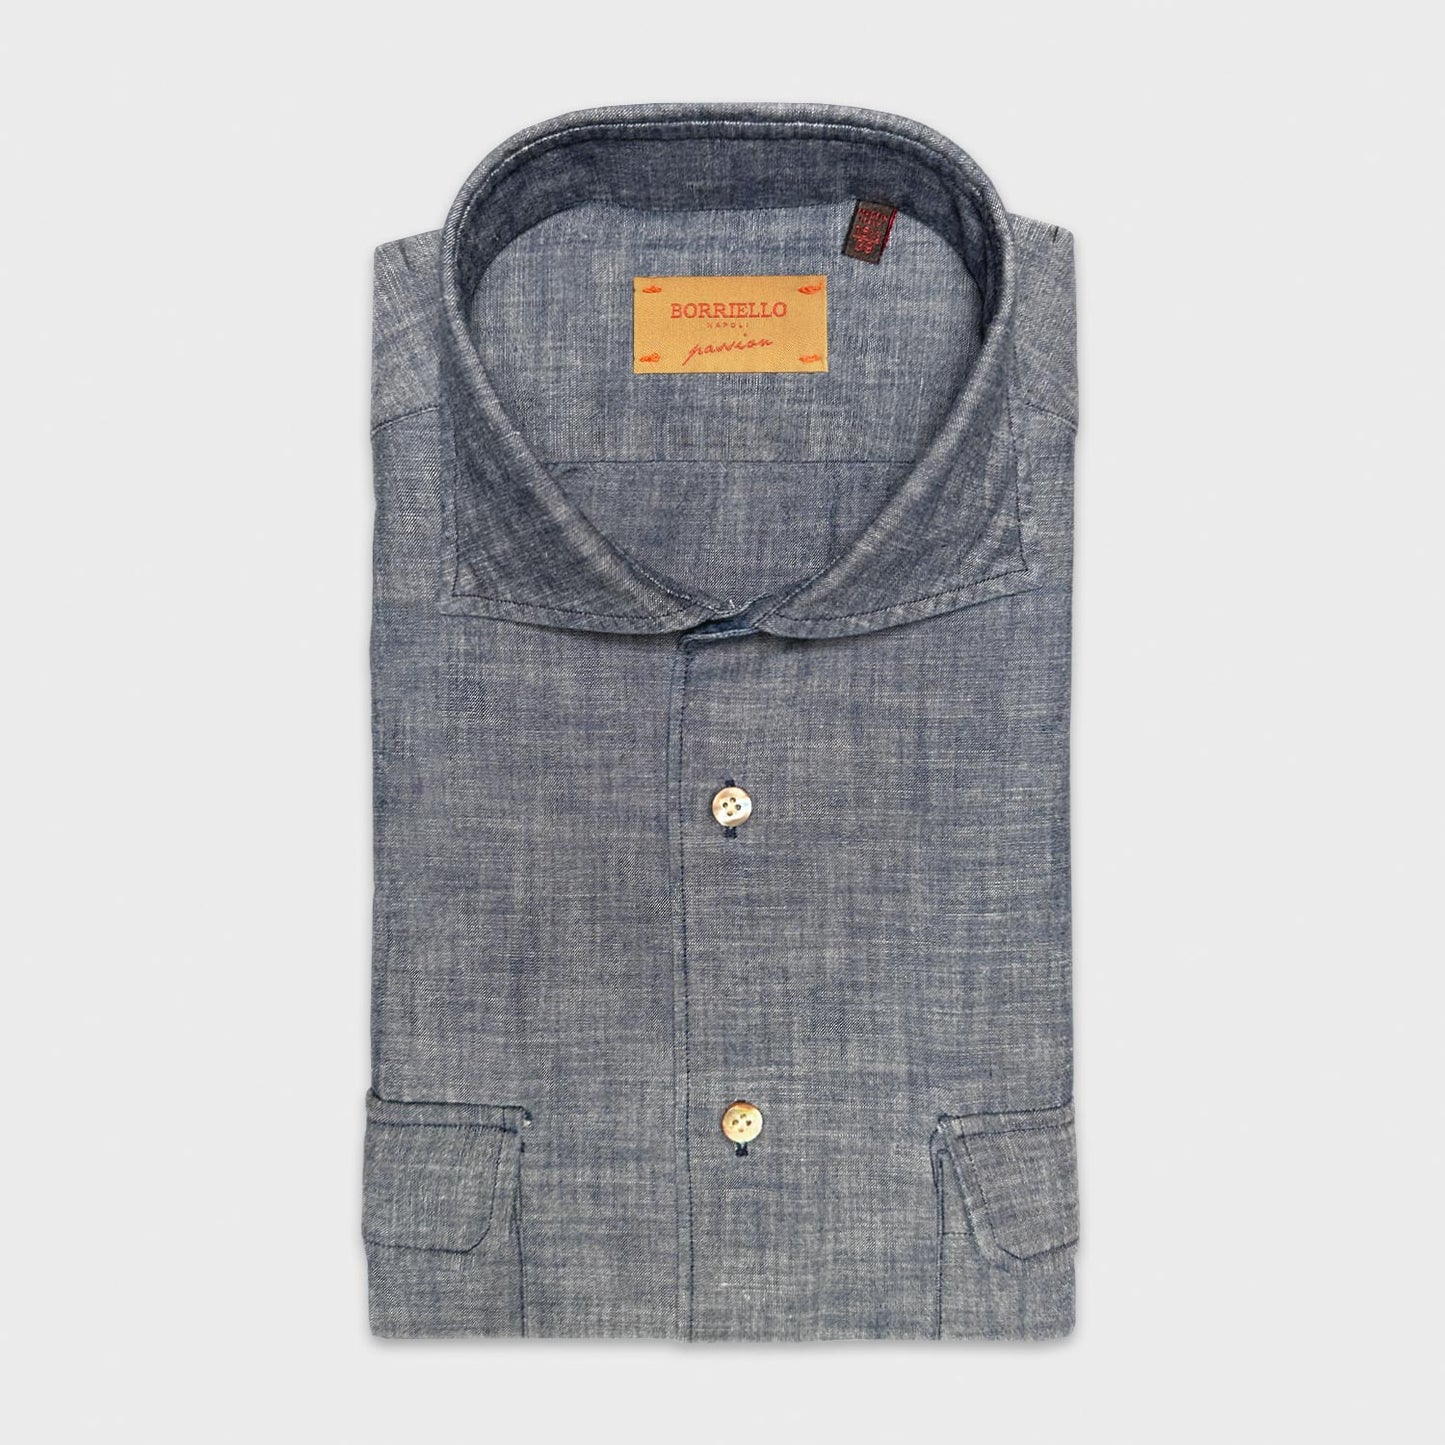 Safari Shirt Chambray Cotton Indigo Navy. Men's safari shirt handmade in Italy by Borriello Napoli. The model of this sporty shirt is originally designed for safari trips, it has always been appreciated for its comfort with four pockets in the front, always trendy in this flamed indigo navy color.